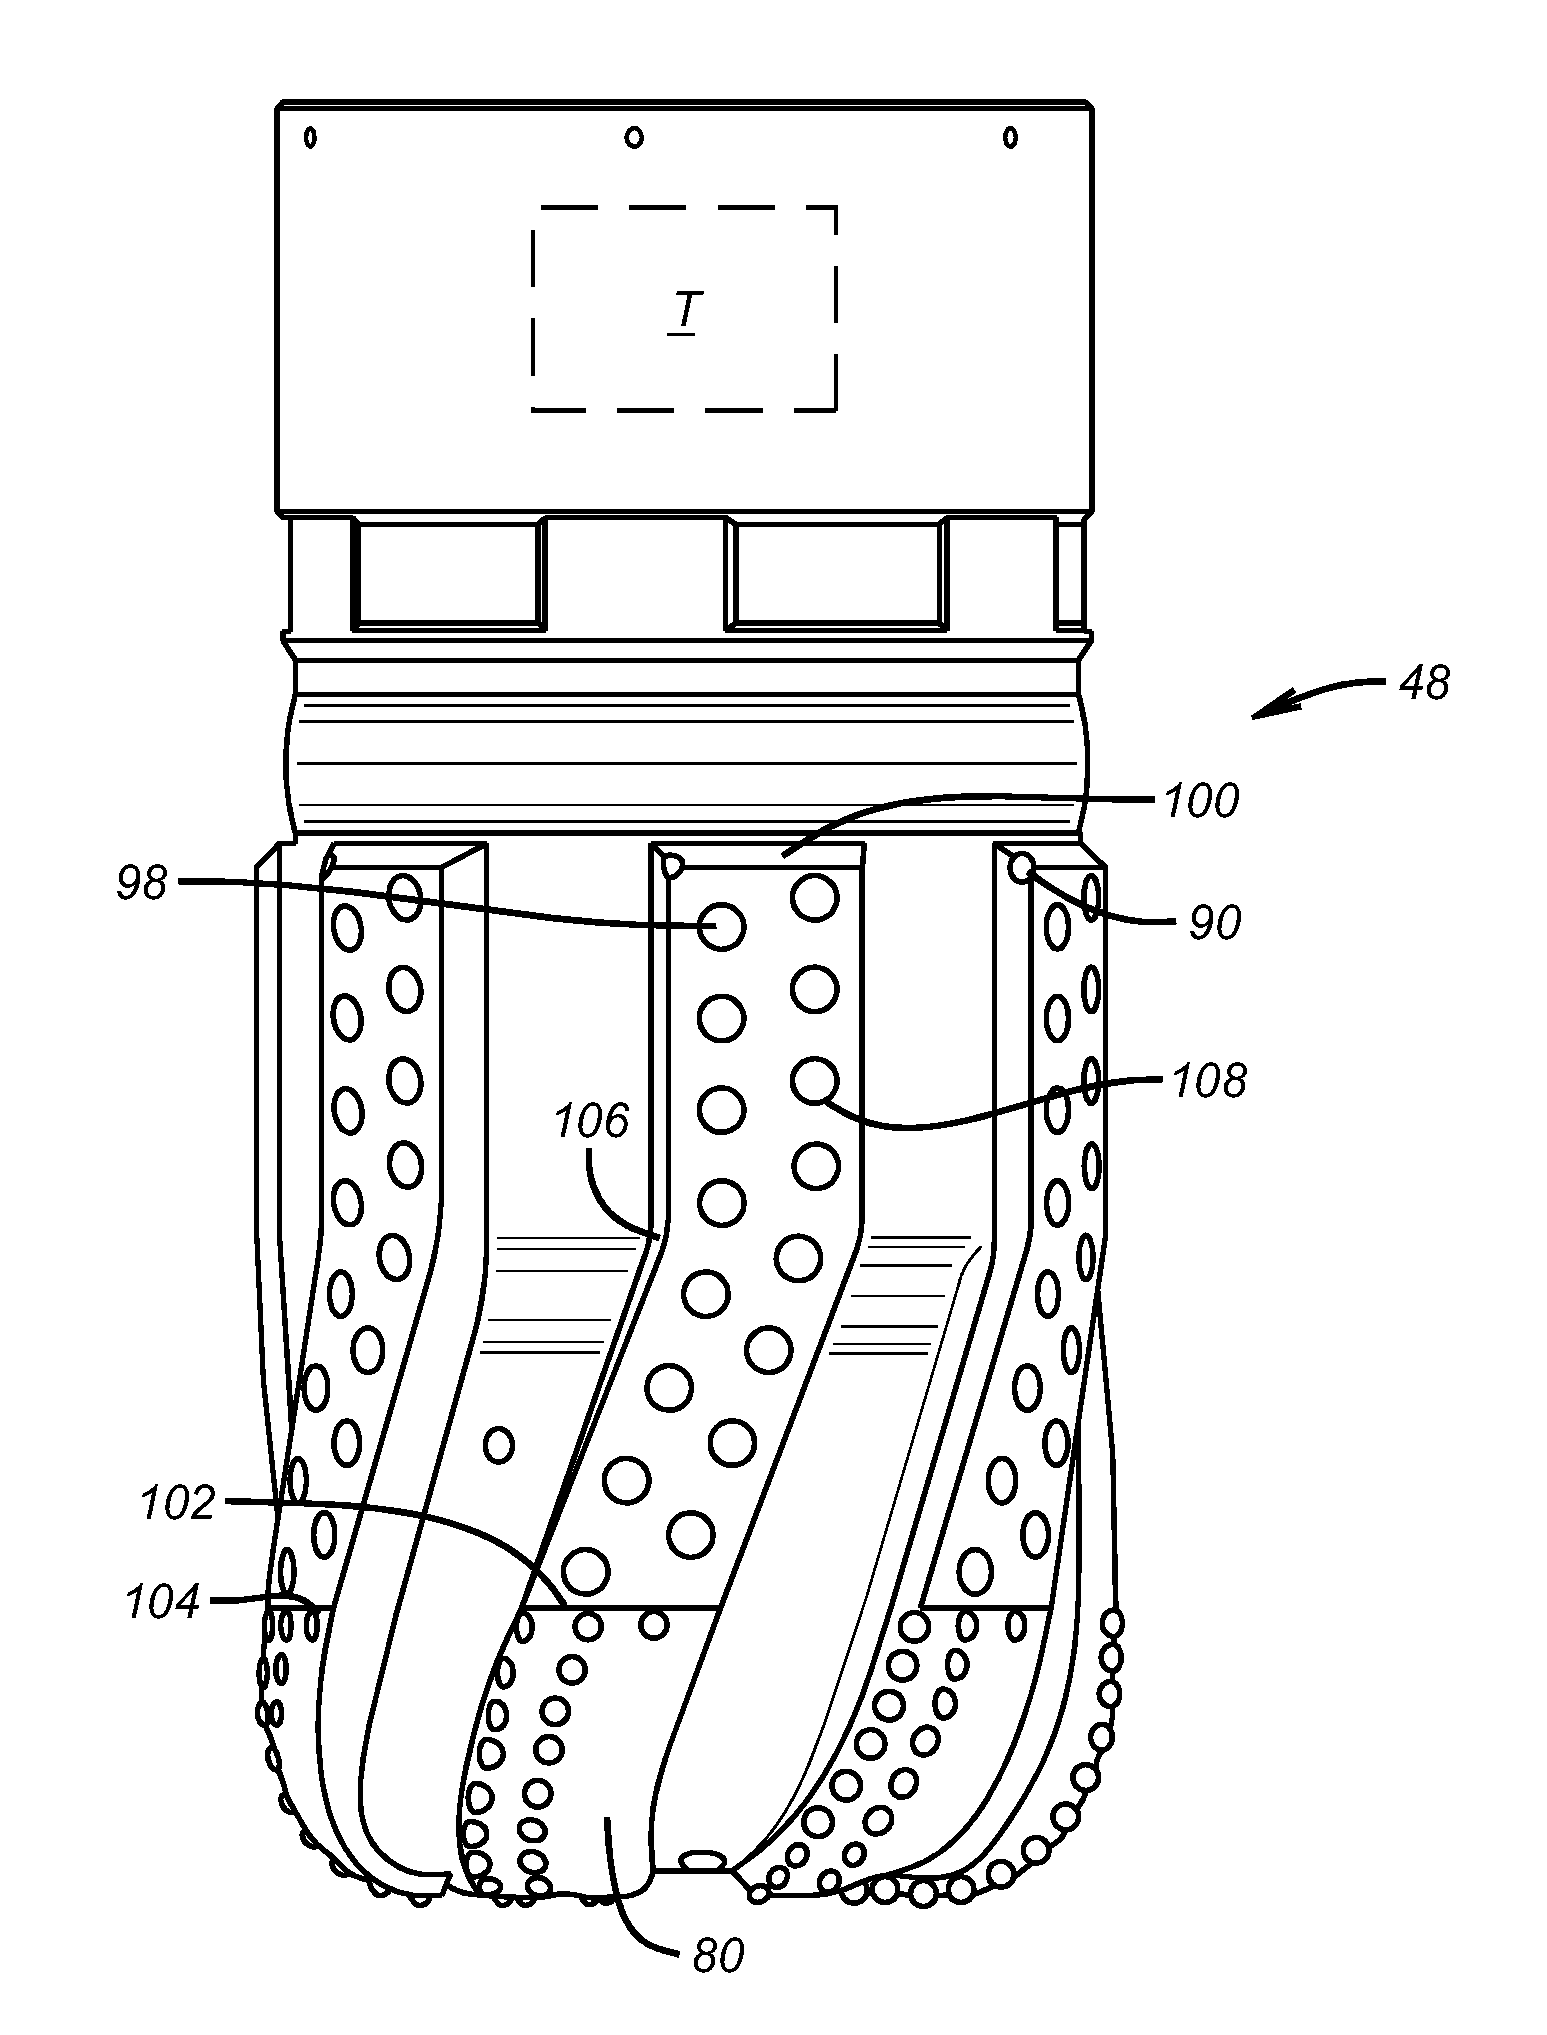 Turbine Driven Reaming Bit with Blades and Cutting Structure Extending into Concave Nose